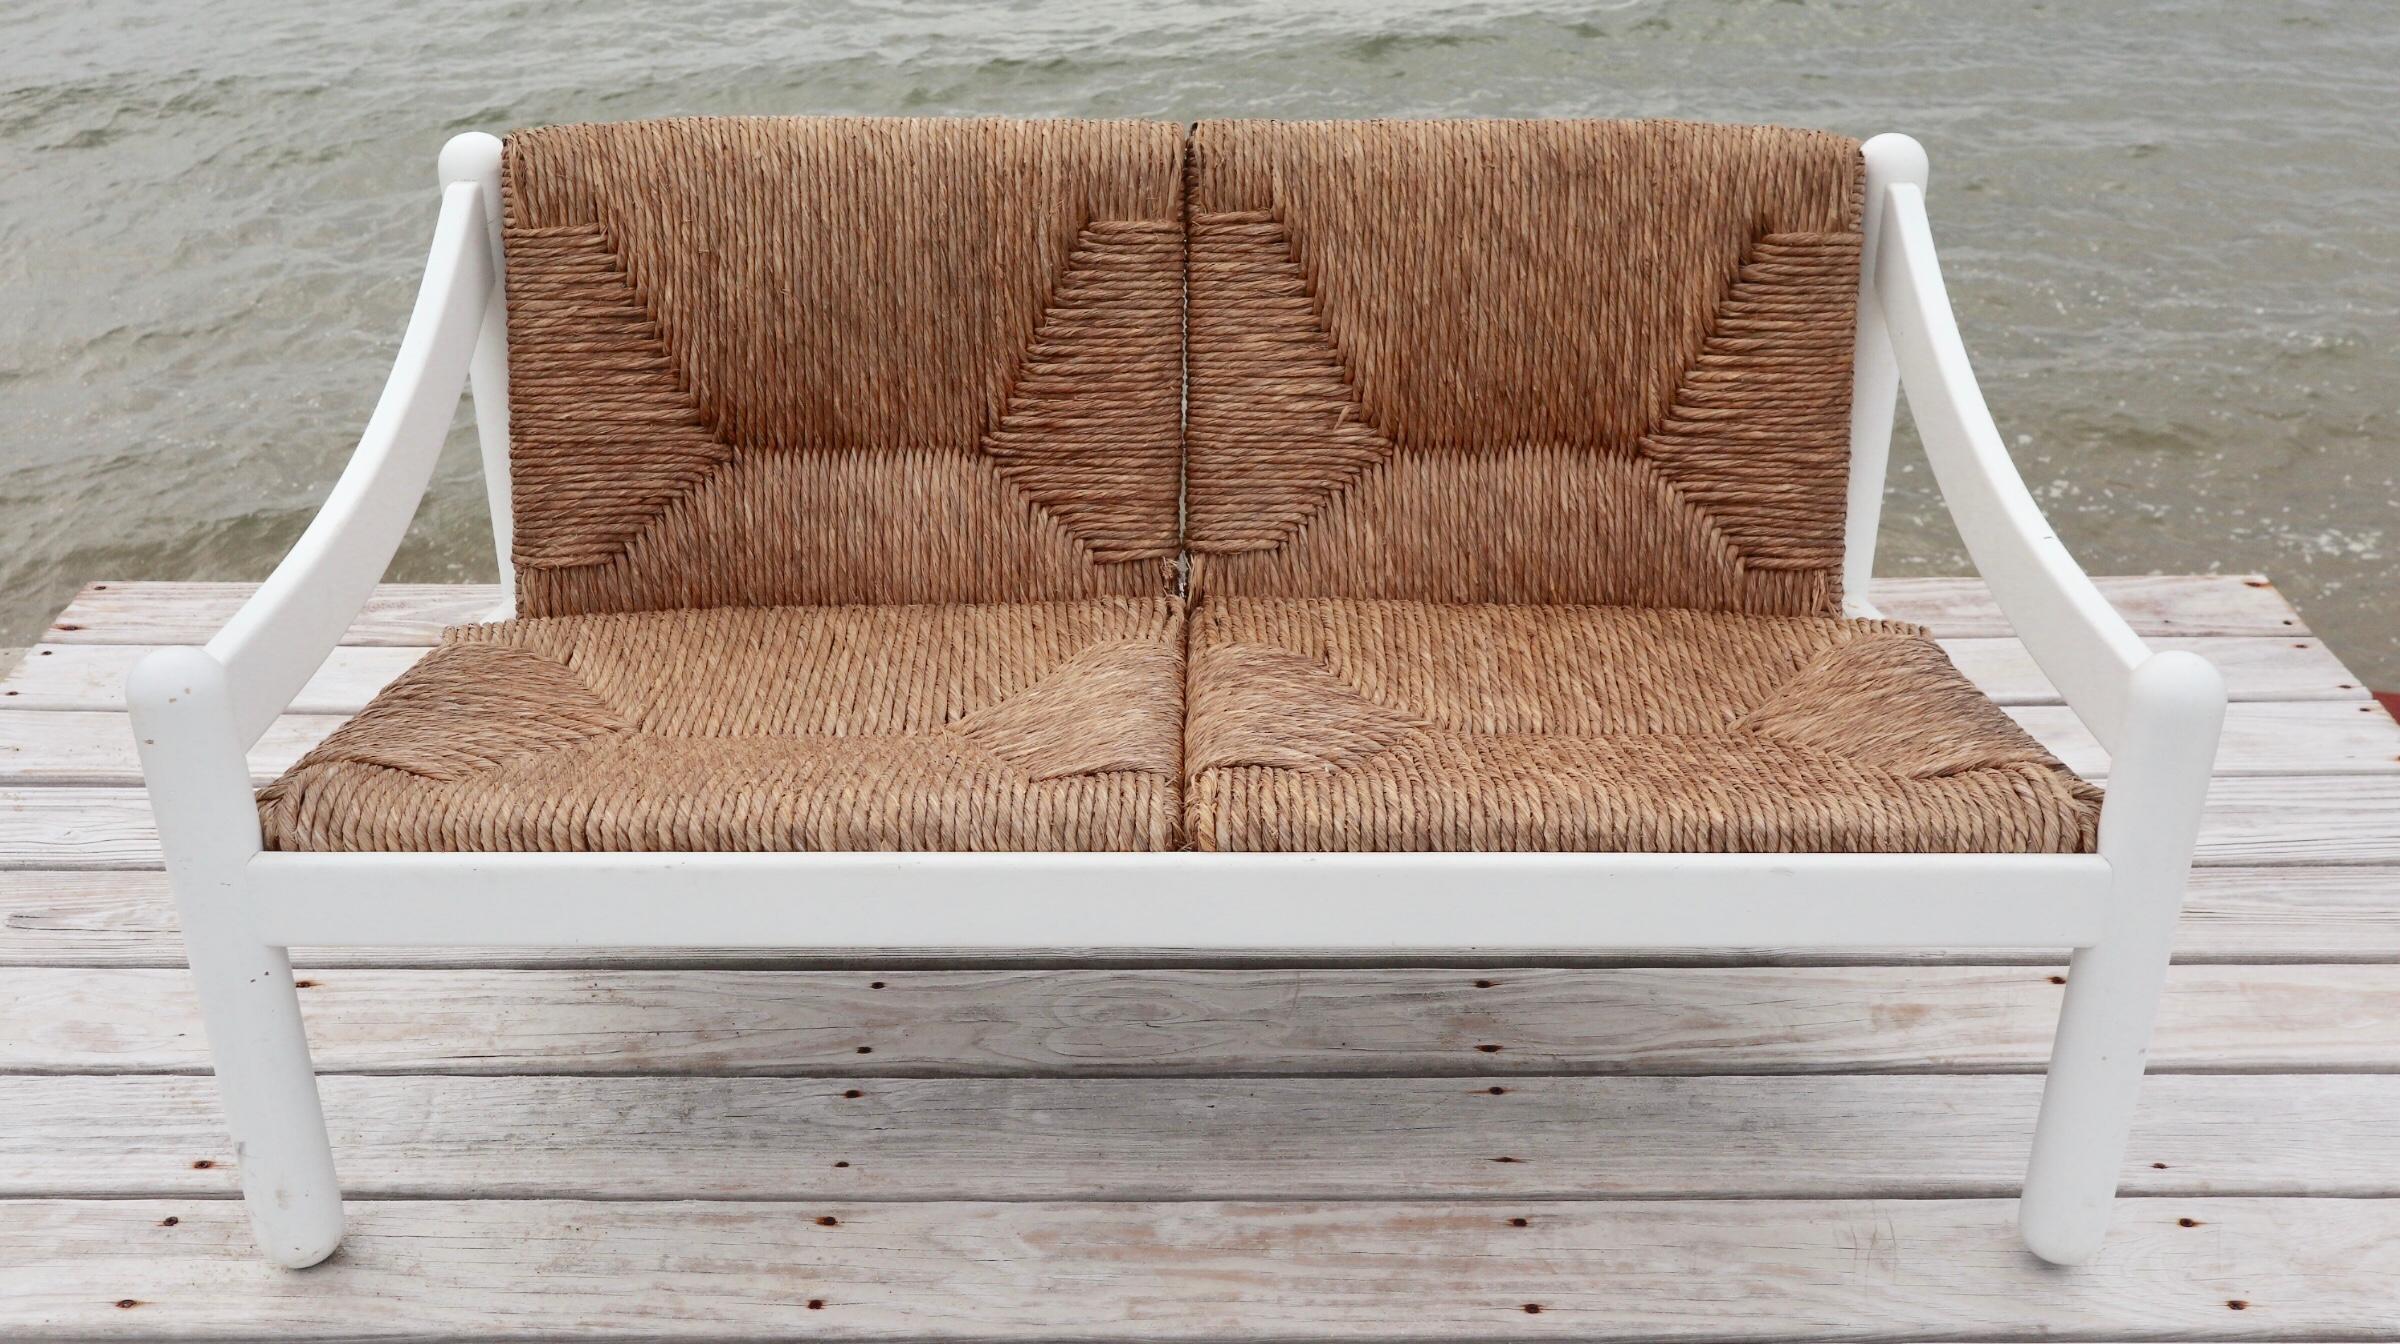 Elegant “Carimate” loveseat by Vico Magistretti for Cassina. Solid wood frame with rush cushions. Very comfortable and sturdy yet airy and easy to move around perfect for a sun porch or summer/country home. Seats 2 comfortably. In original